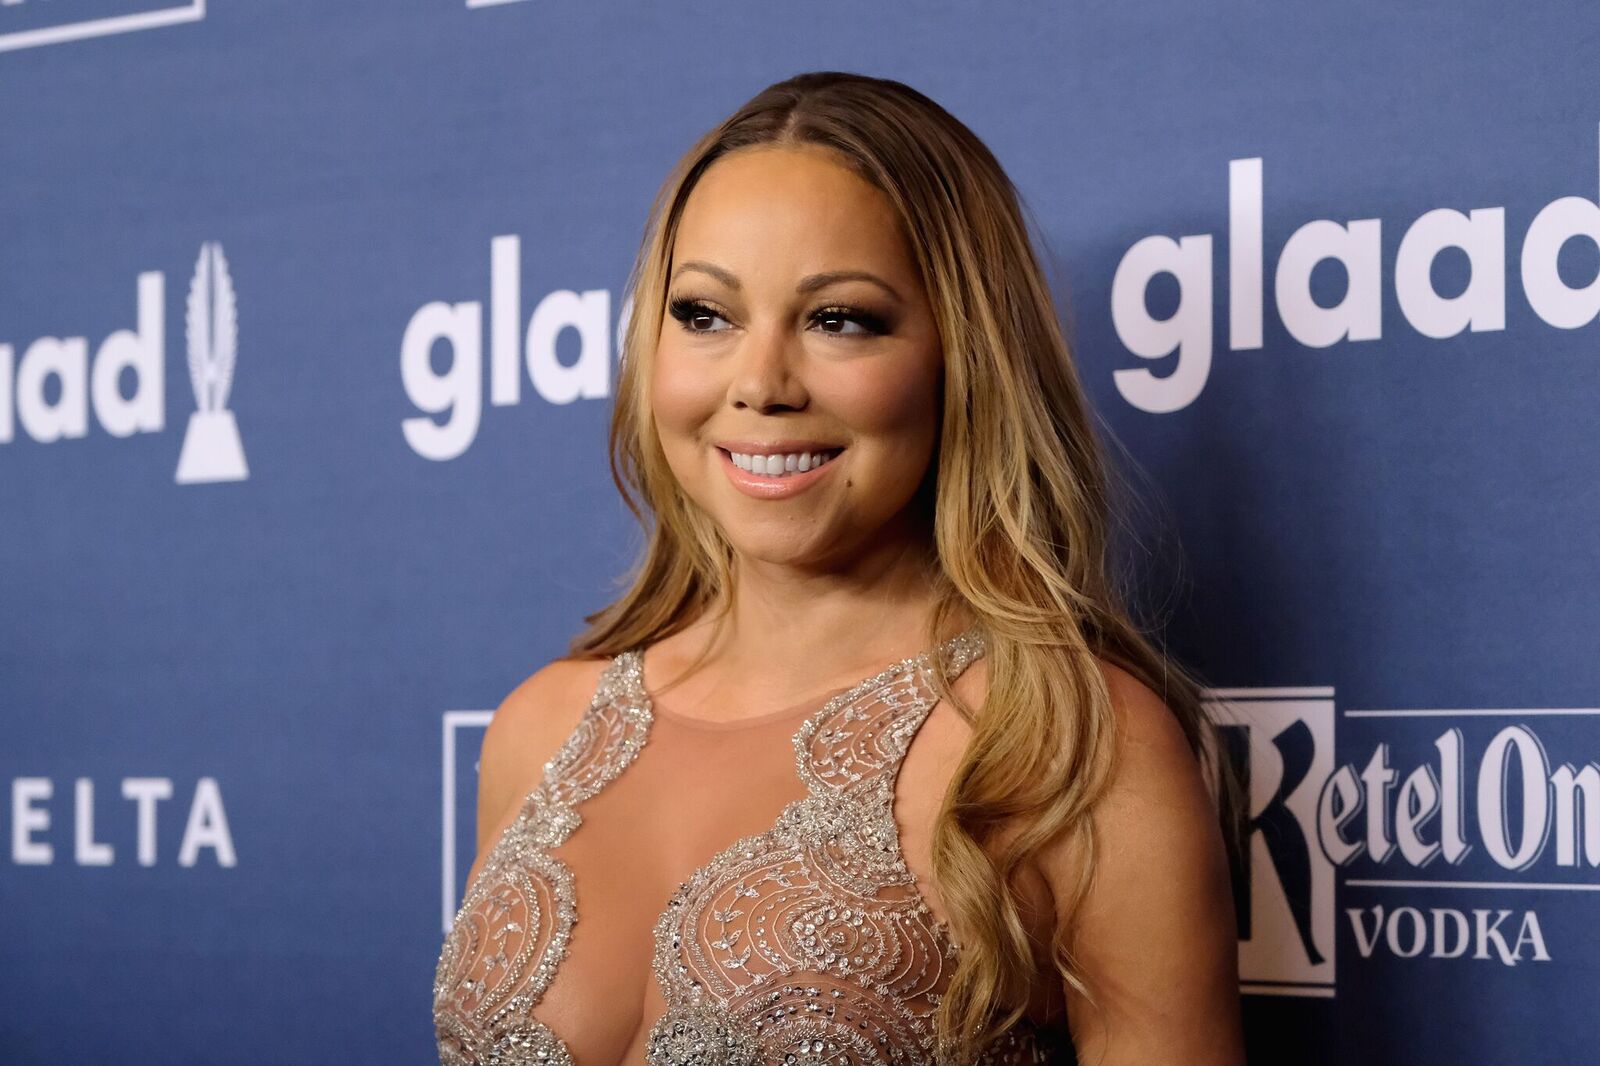  Mariah Carey attends at The 27th Annual GLAAD Media Awards with Hilton at Waldorf Astoria Hotel on May 14, 2016 in New York City.  | Photo: Getty Images